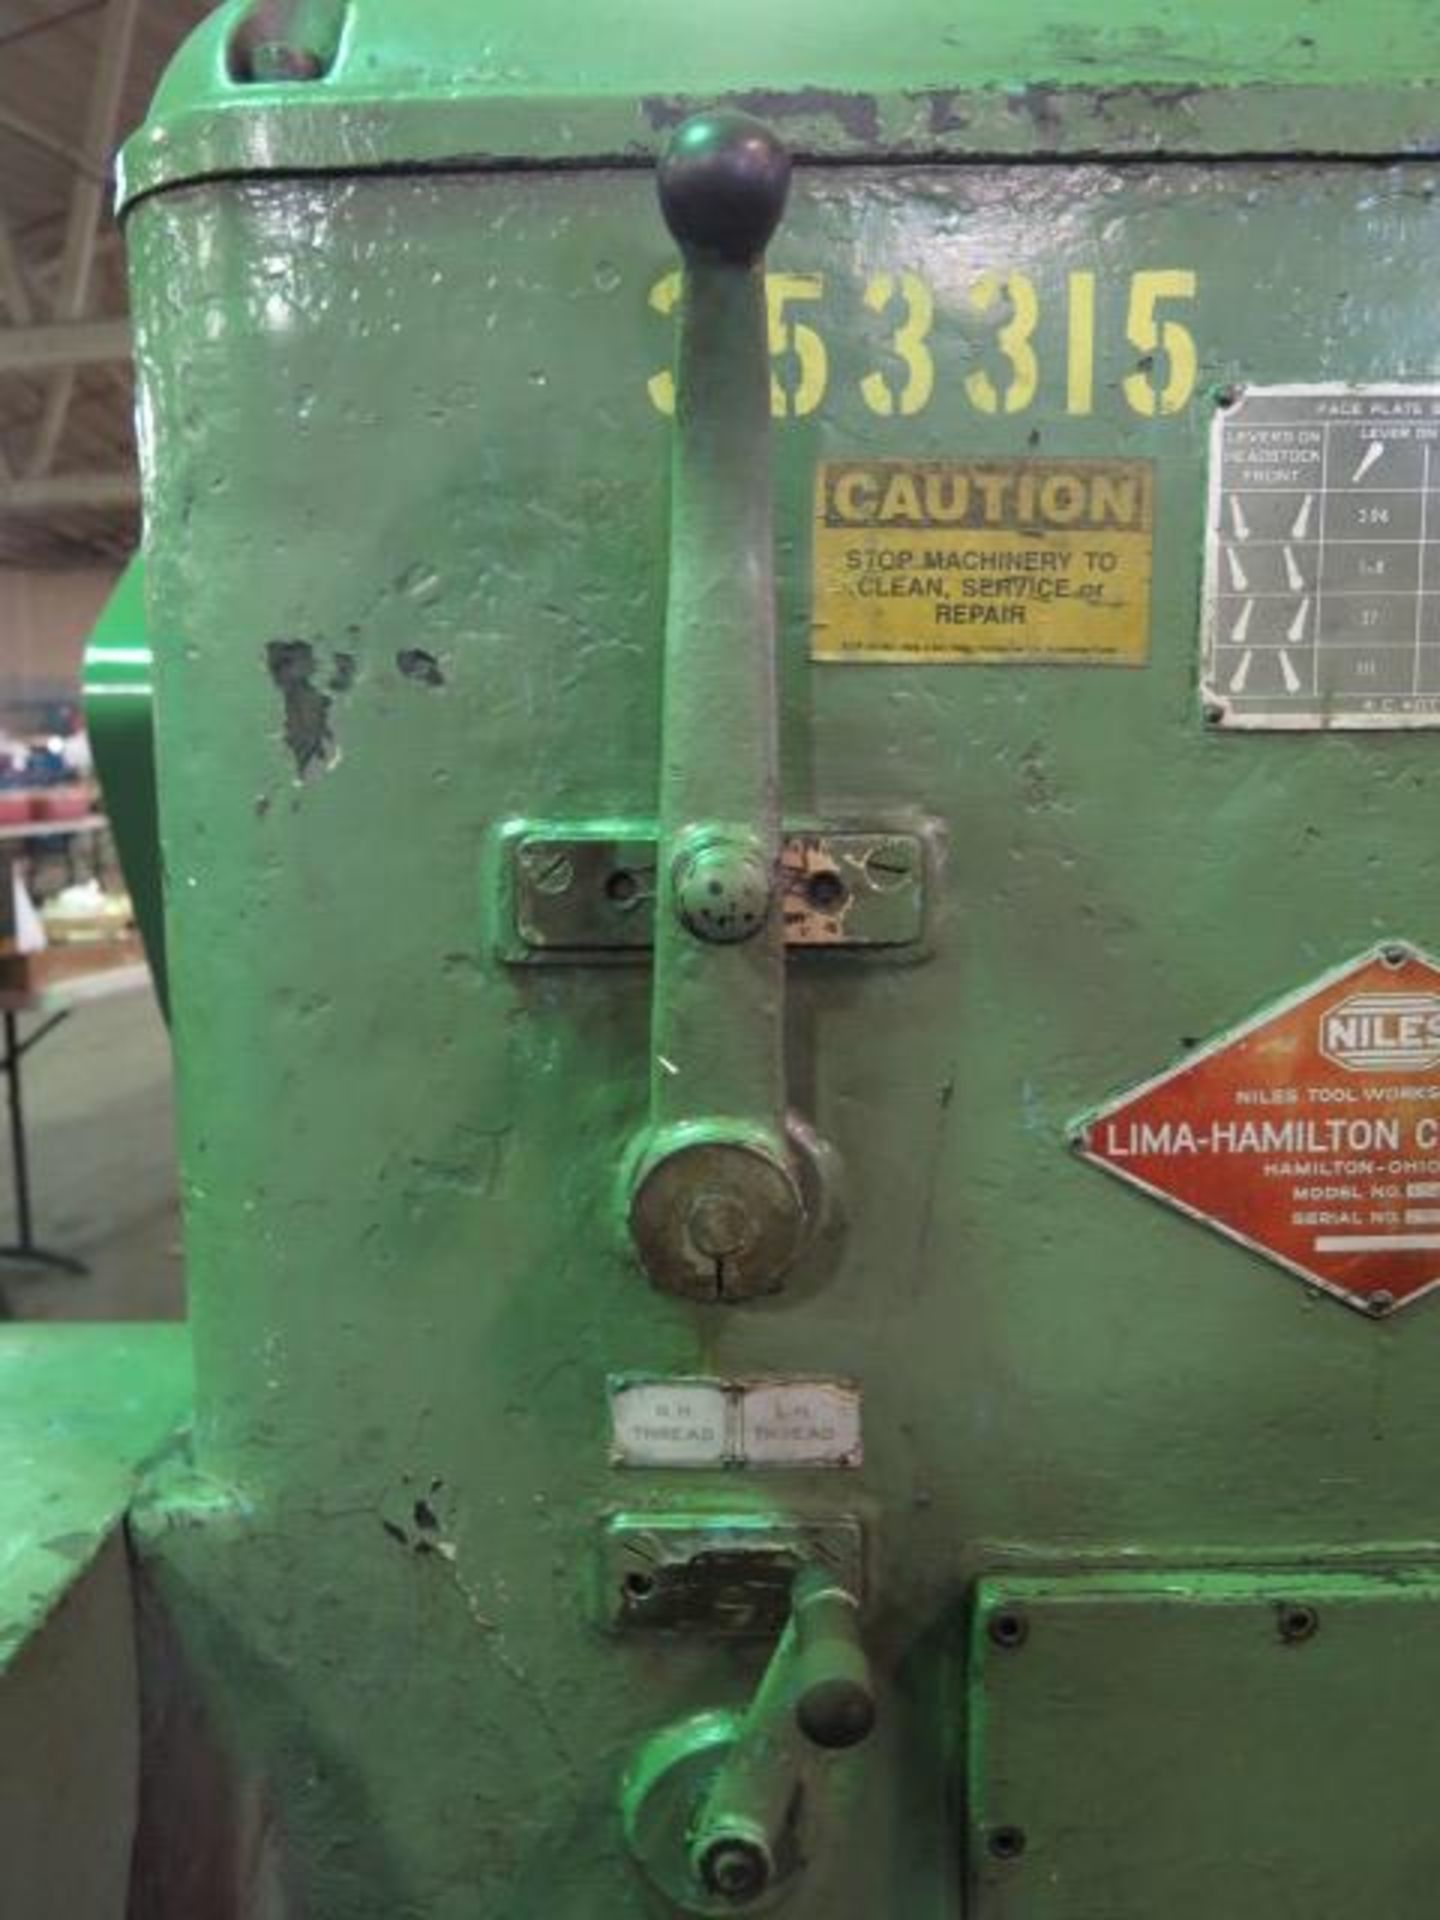 Niles A54P 62” x 140” Lathe s/n 23579 w/ 3.94-232 RPM, Inch Threading, Steady Rest, SOLD AS IS - Image 8 of 20